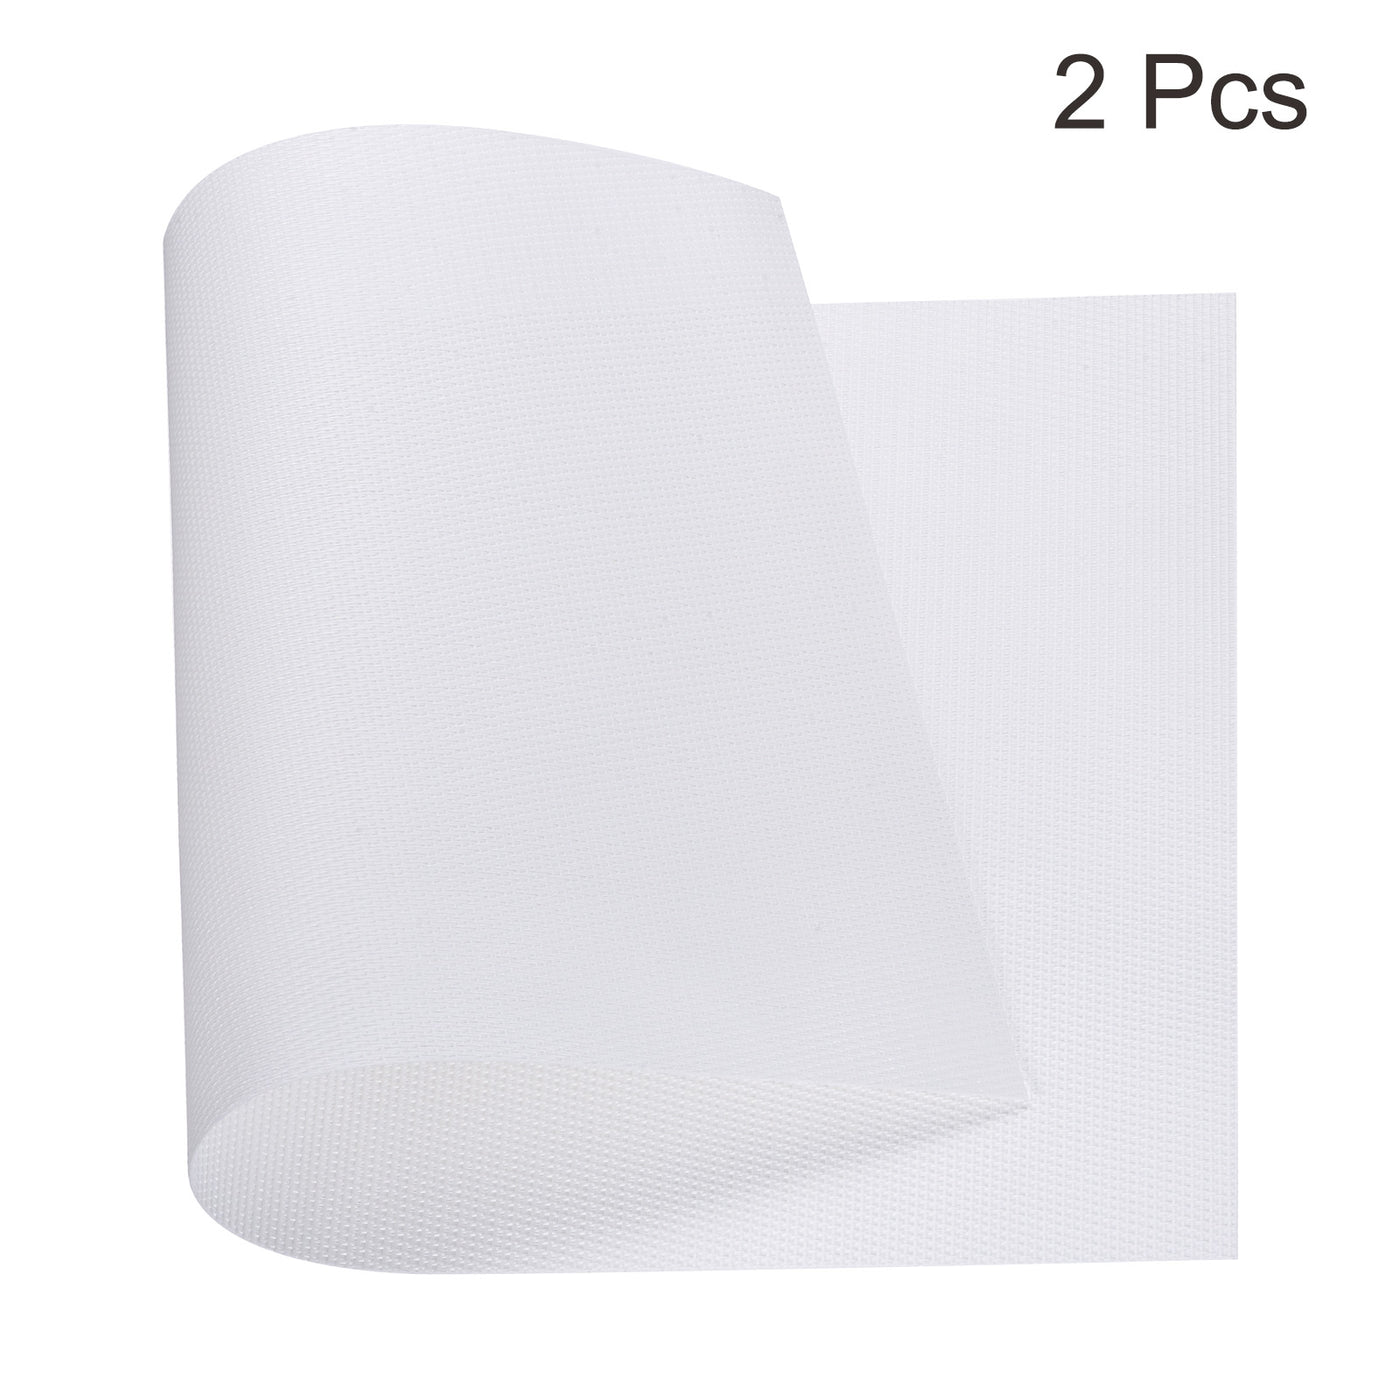 uxcell Uxcell Place Mats 450x300mm 2pcs PVC Table Washable Woven Placemat, White